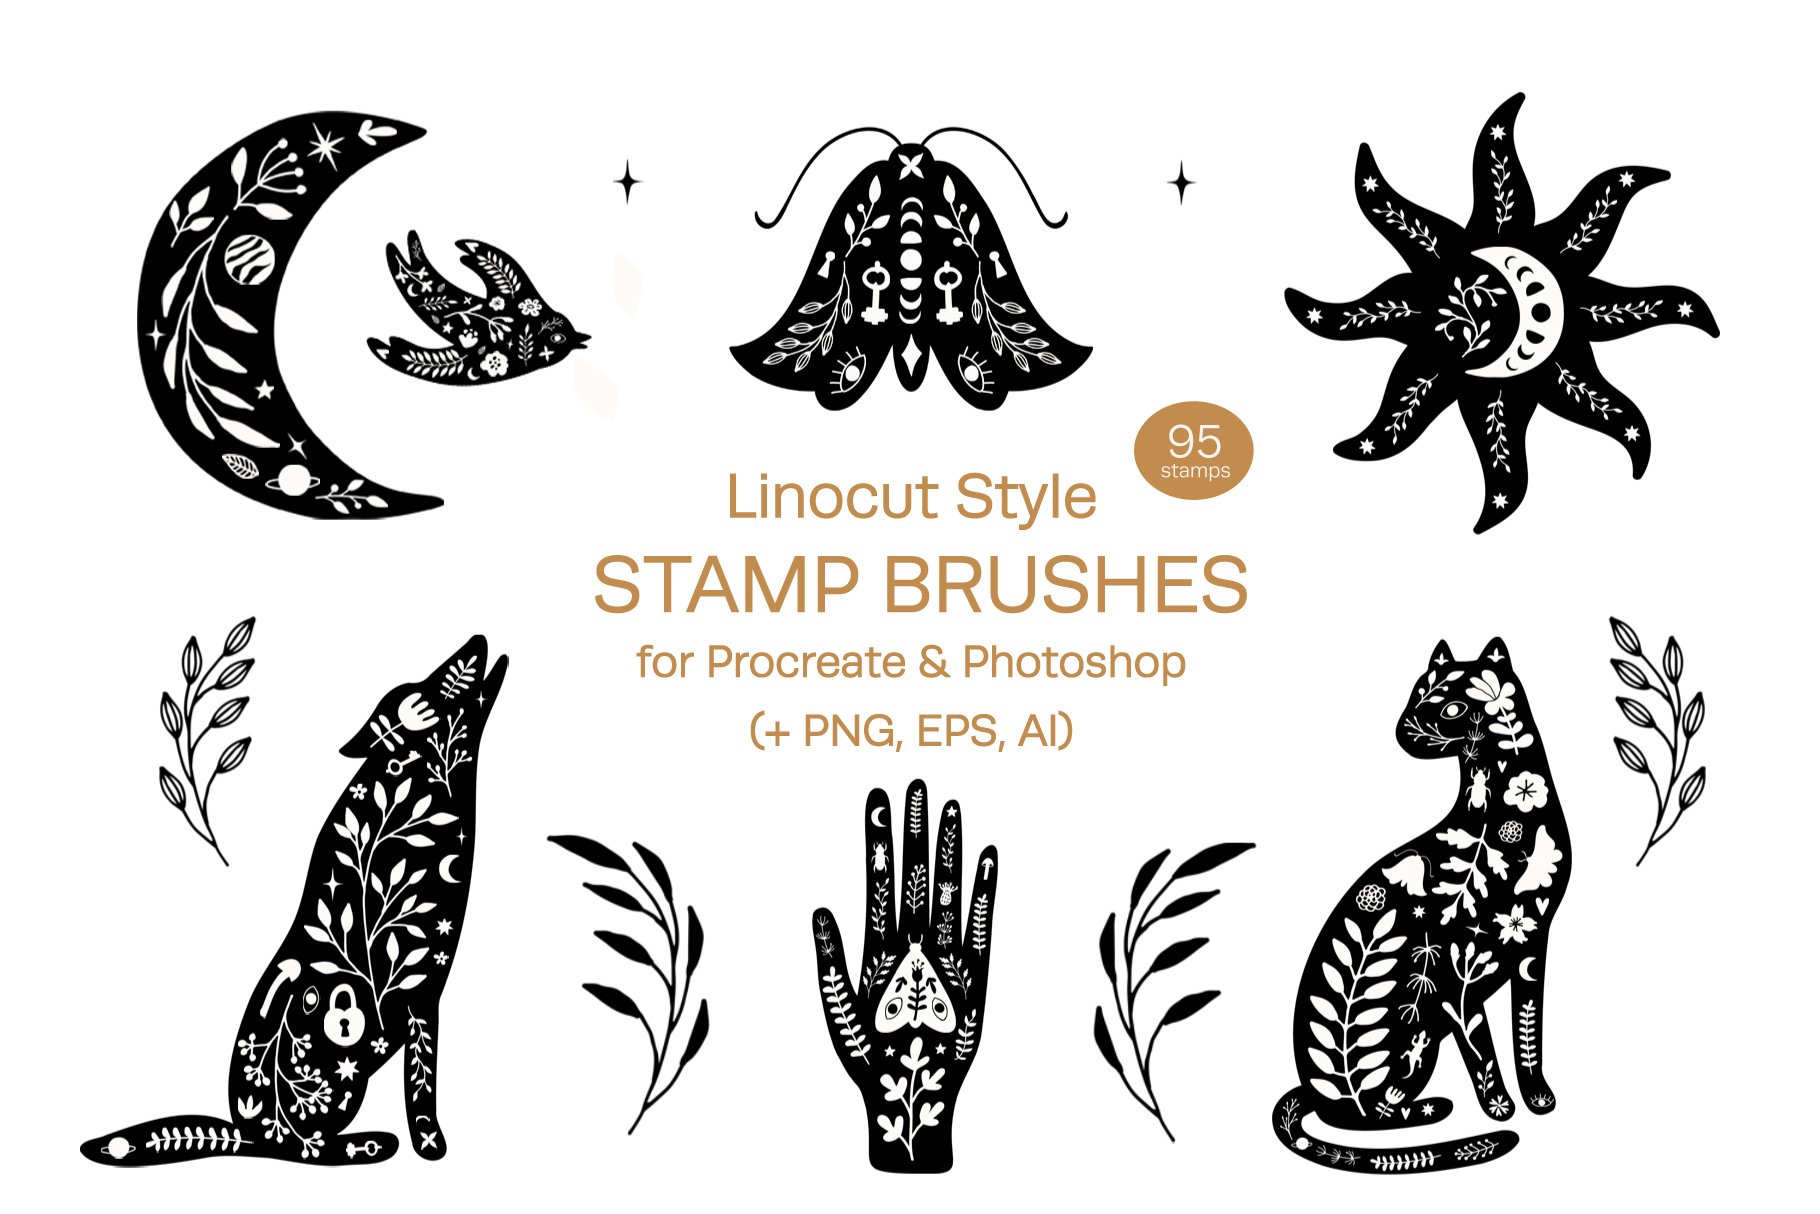 Linocut Style Stamp Brushescover image.